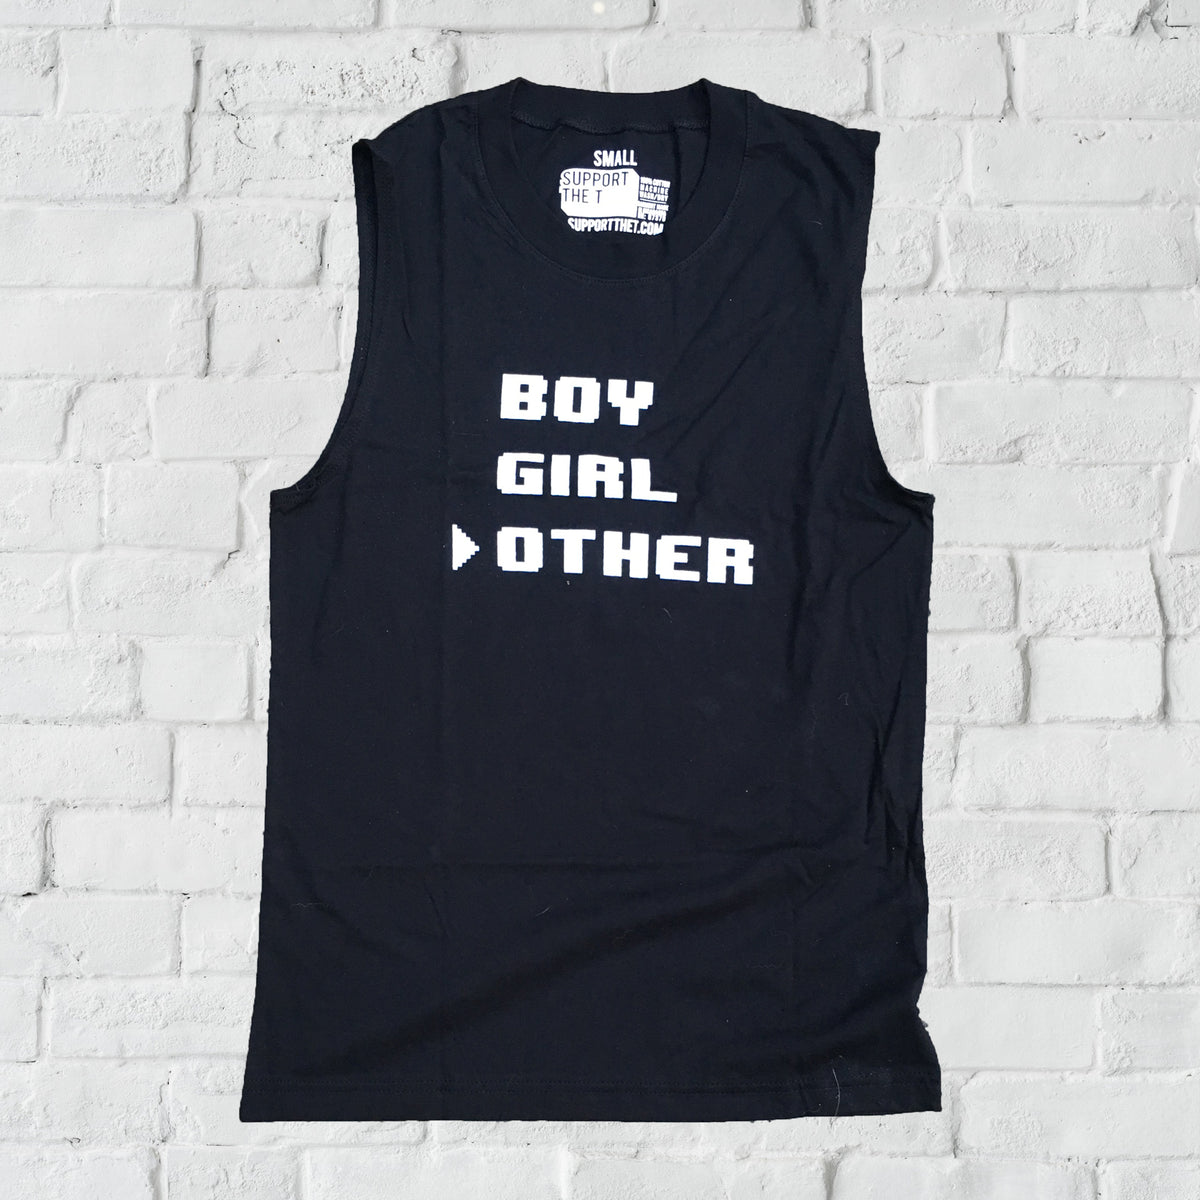 Boy, Girl, >Other tank top – Support the T